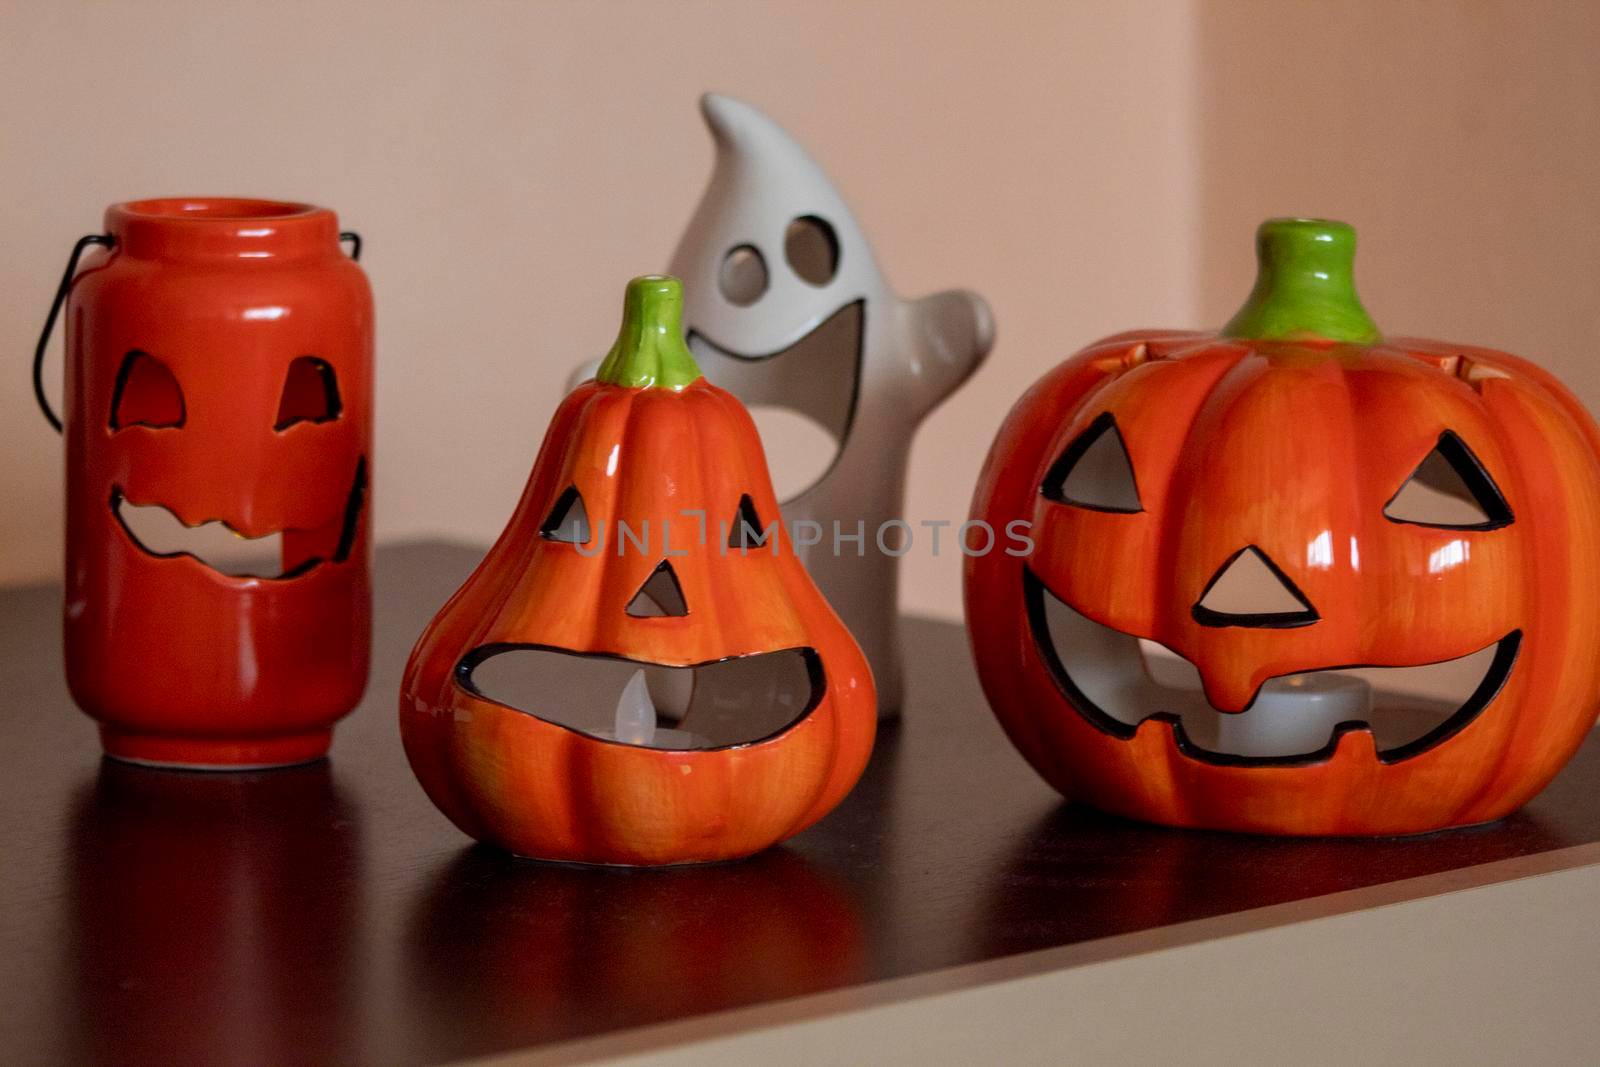 Pumpkins with smiling faces ready for halloween by bybyphotography